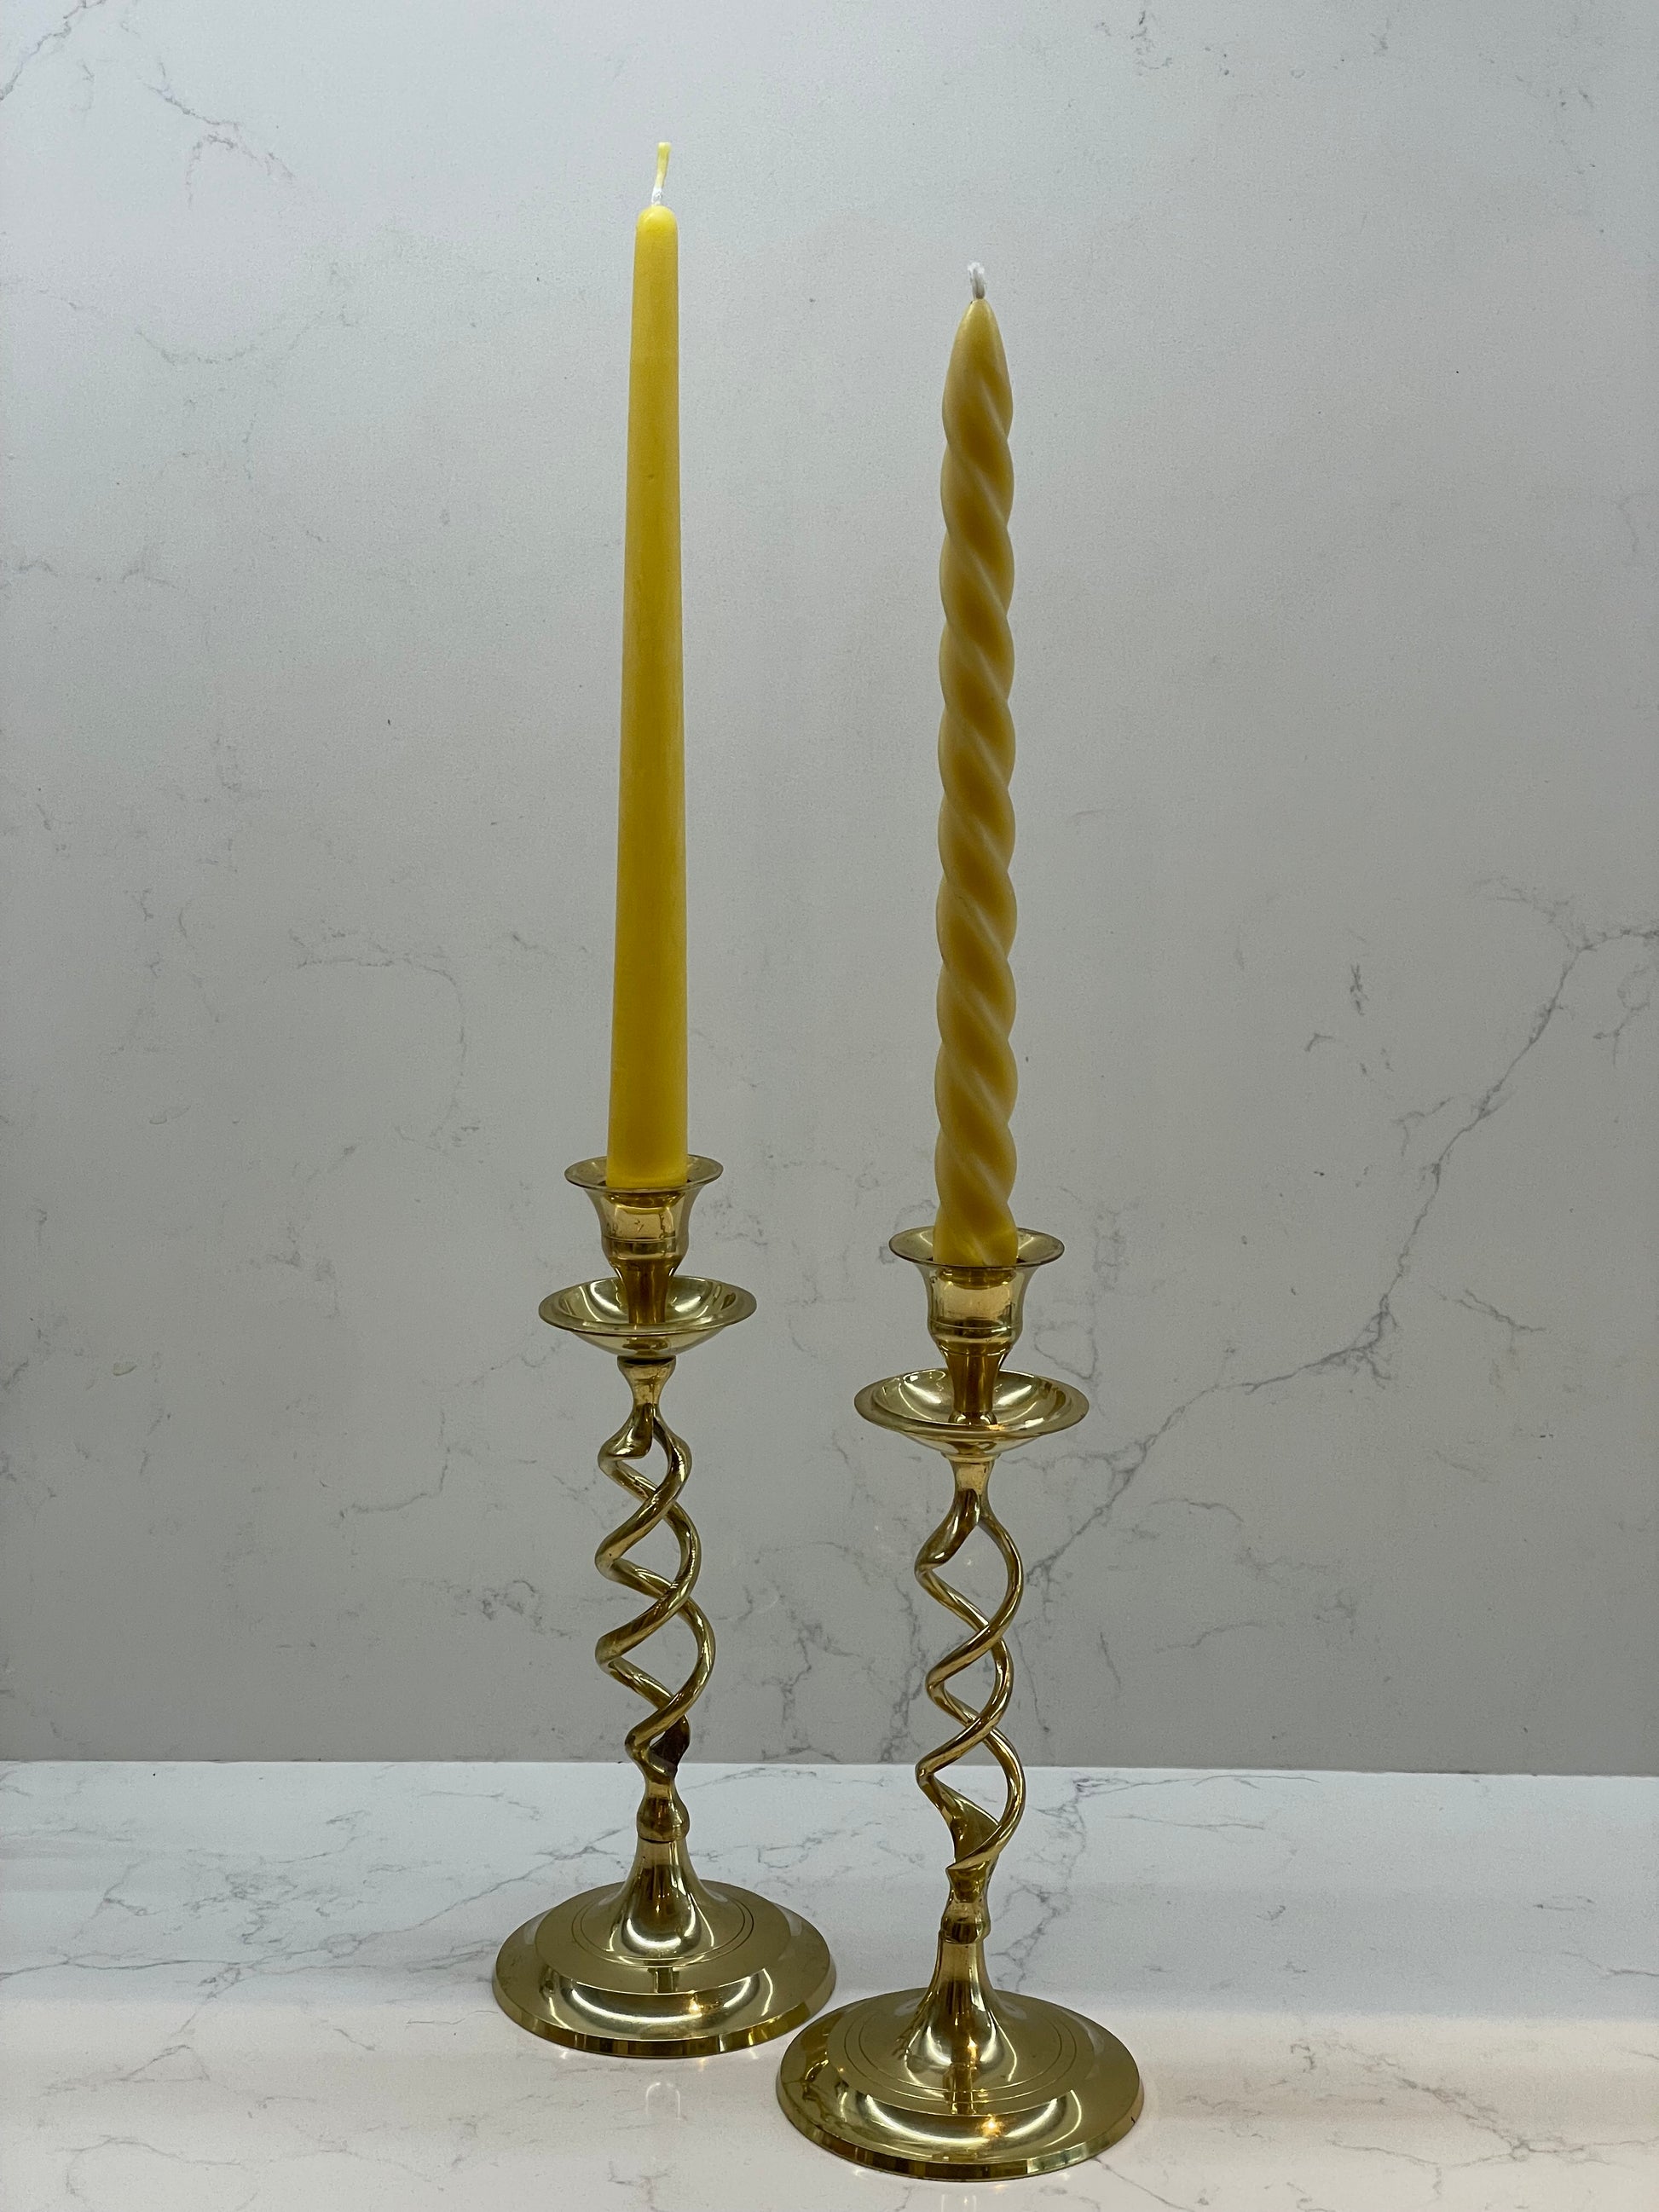 Charming barley twist candlesticks with 4 pure London beeswax